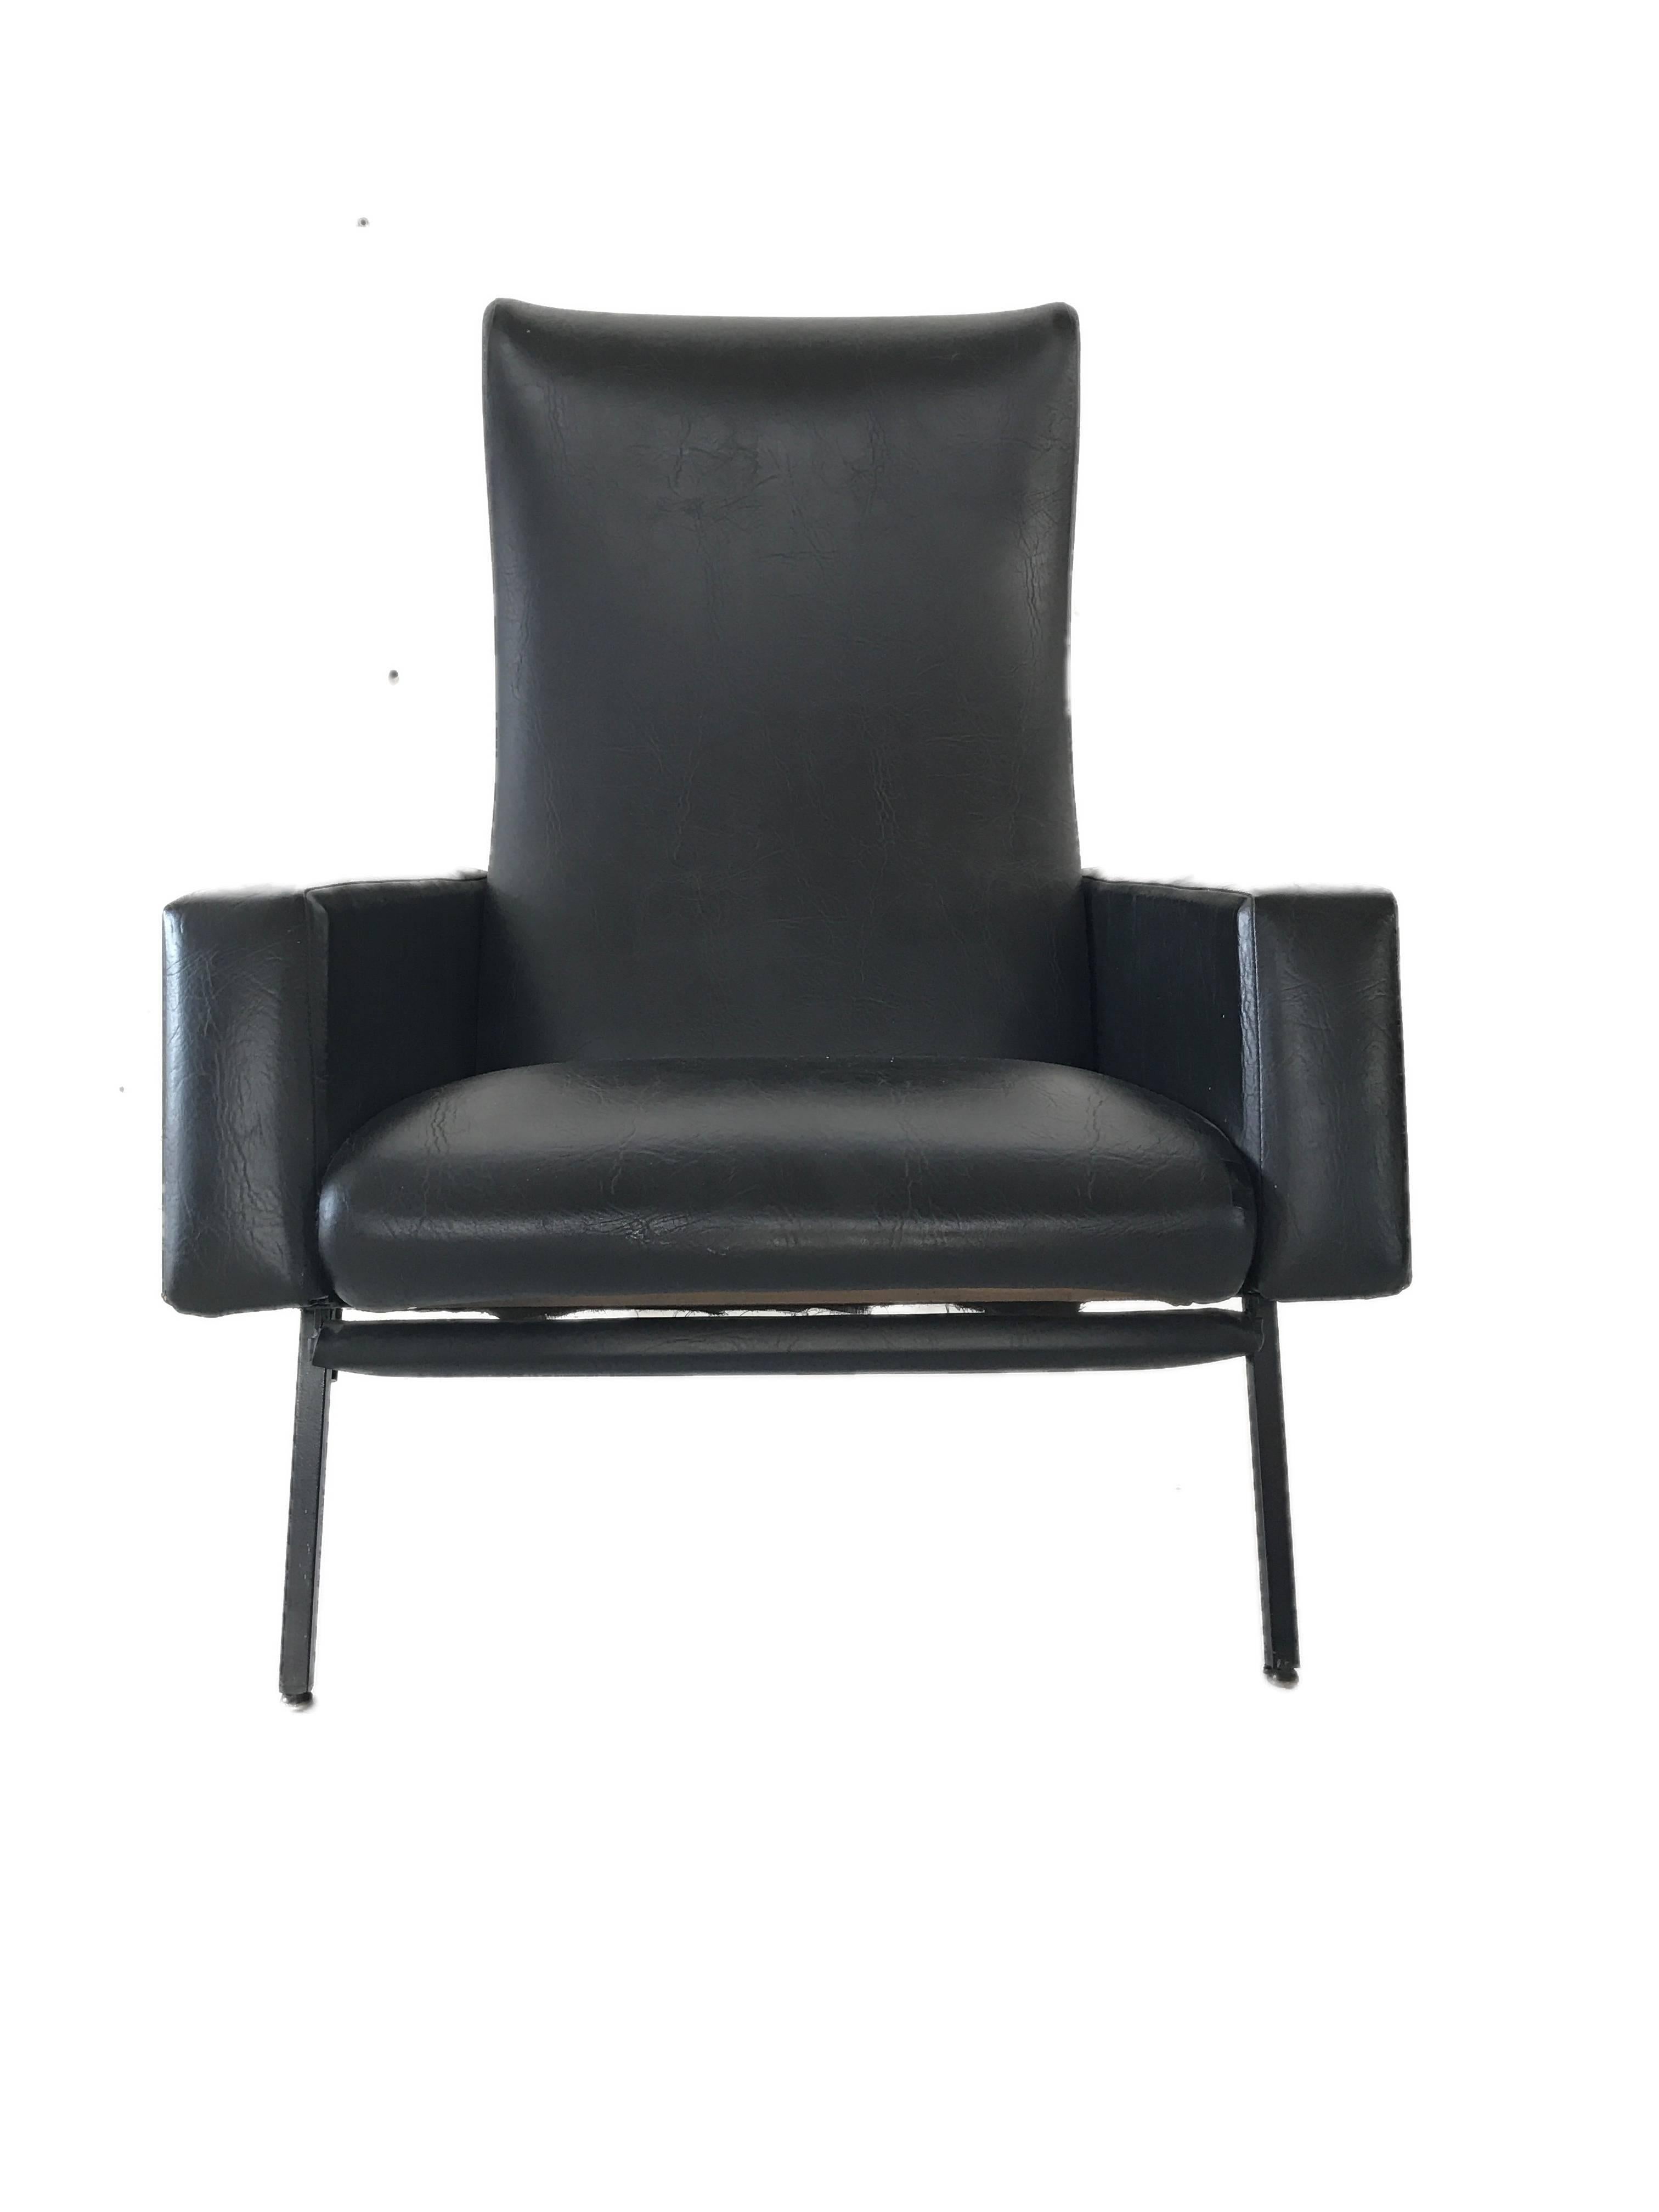 Trelax easy chair by Pierre Guariche for Meurop Belgium from the 1950s
Original black skai leather upholstery and a black lacquered metal base
Traces of wear and use consistent with age.